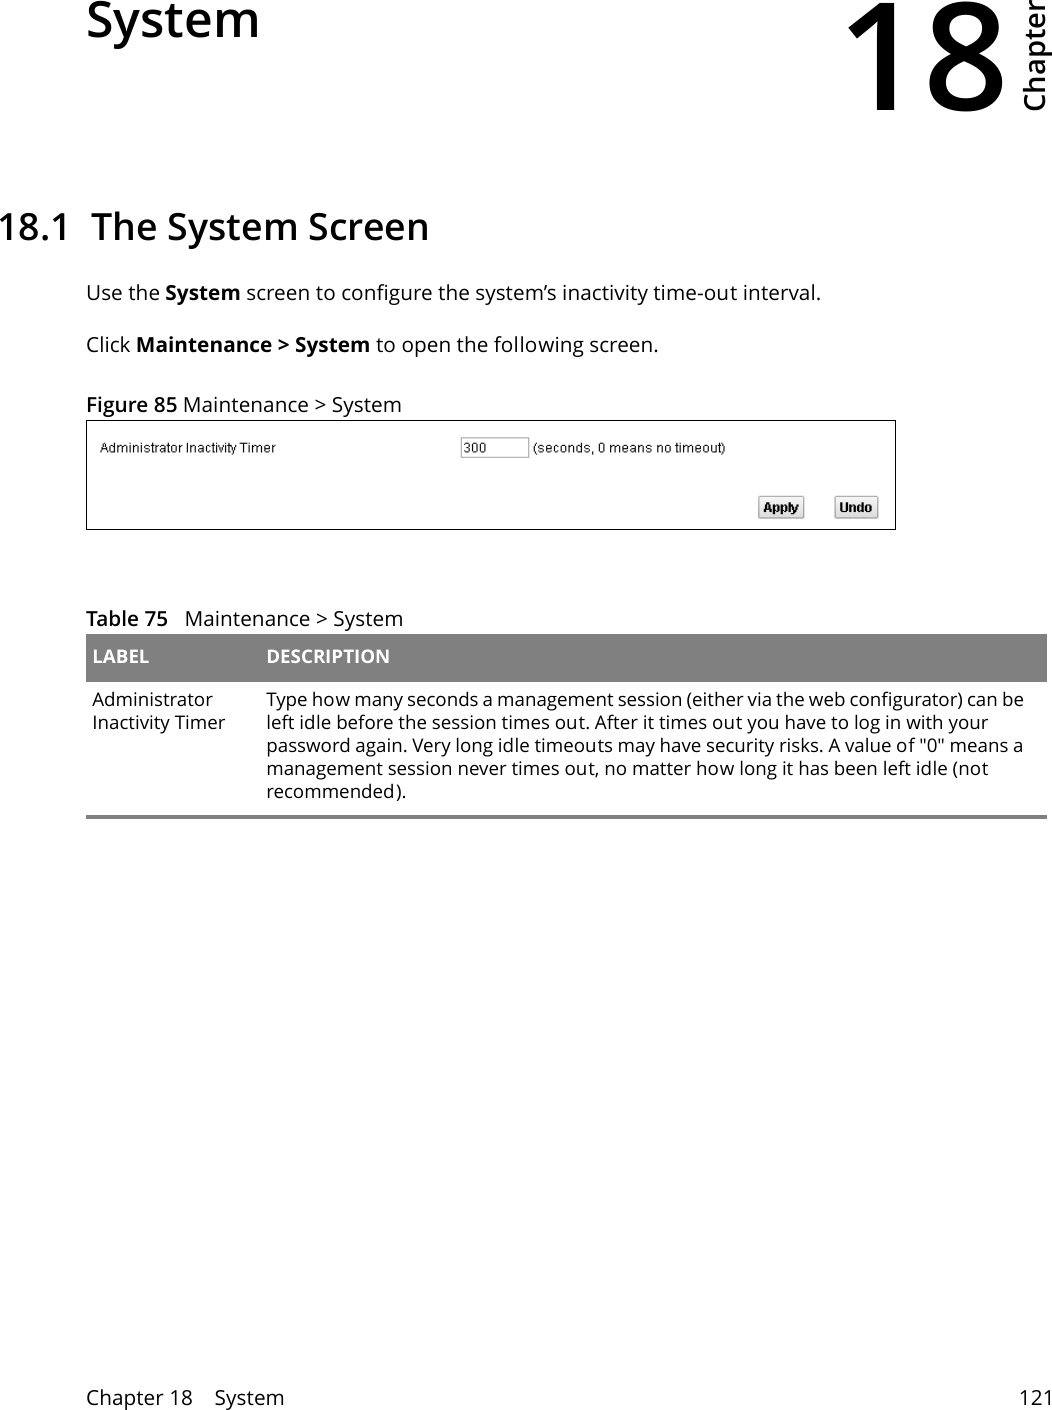 18Chapter Chapter 18    System 121CHAPTER 18 Chapter 18 System18.1  The System ScreenUse the System screen to configure the system’s inactivity time-out interval.Click Maintenance &gt; System to open the following screen. Figure 85 Maintenance &gt; System  Table 75   Maintenance &gt; System LABEL DESCRIPTIONAdministrator Inactivity TimerType how many seconds a management session (either via the web configurator) can be left idle before the session times out. After it times out you have to log in with your password again. Very long idle timeouts may have security risks. A value of &quot;0&quot; means a management session never times out, no matter how long it has been left idle (not recommended).